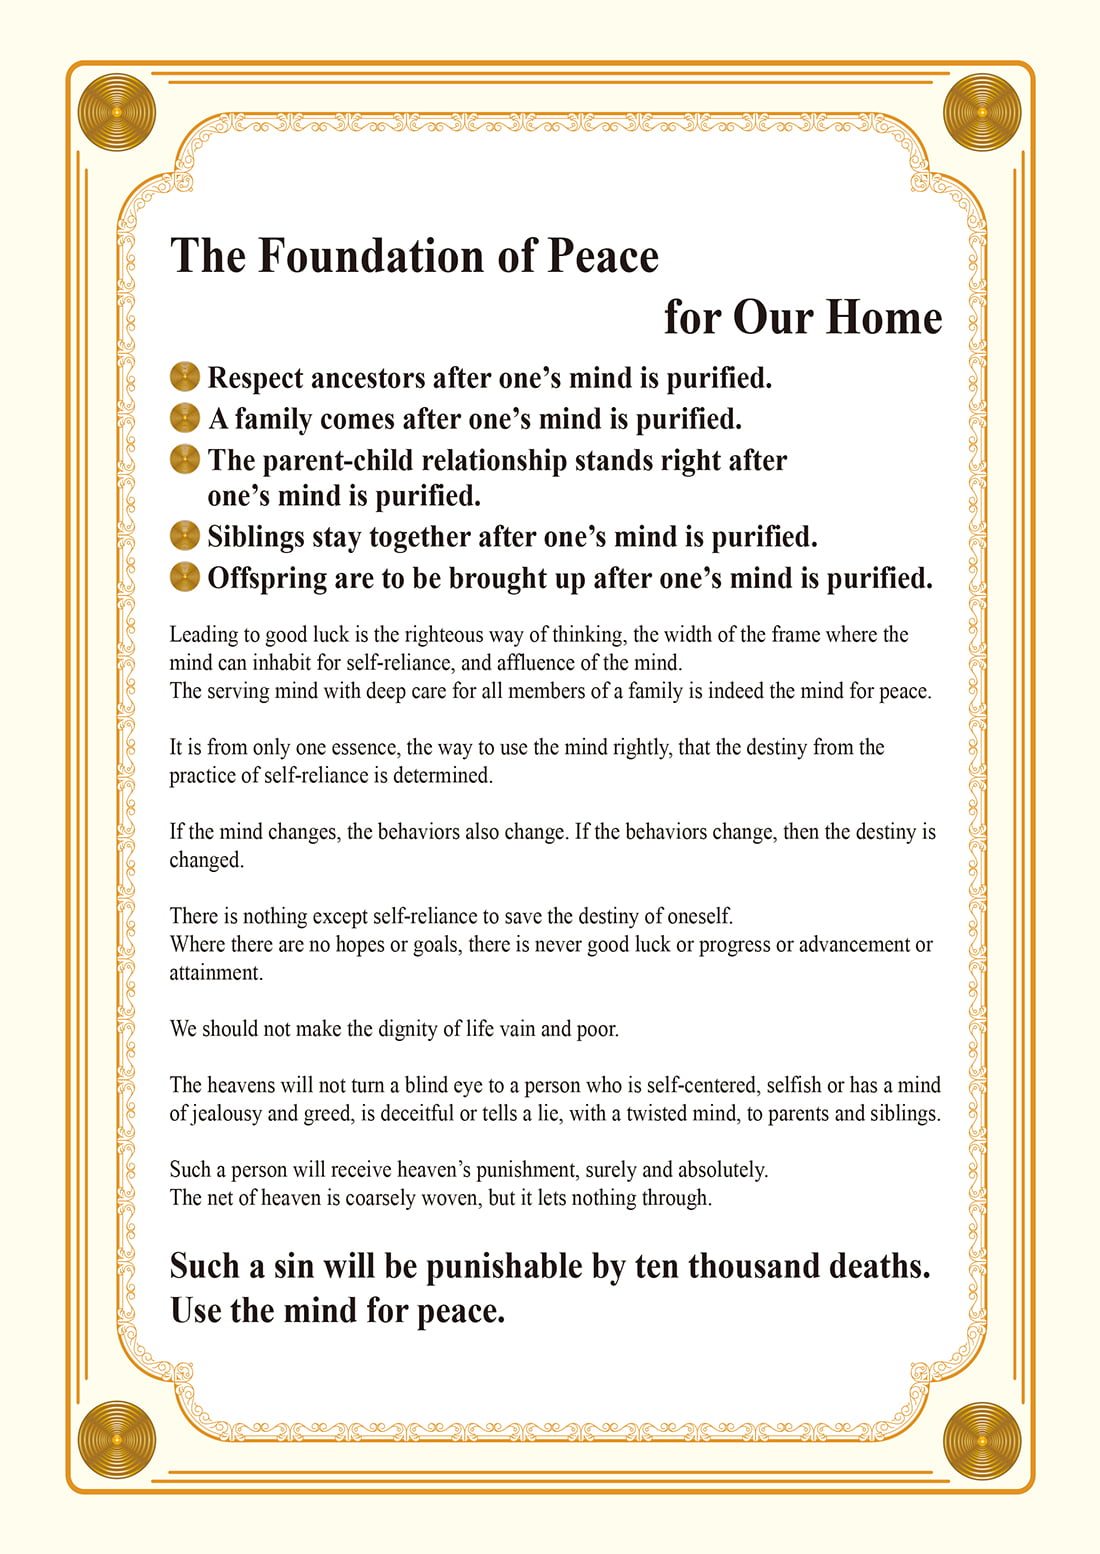 The Foundation of Peace for Our Home